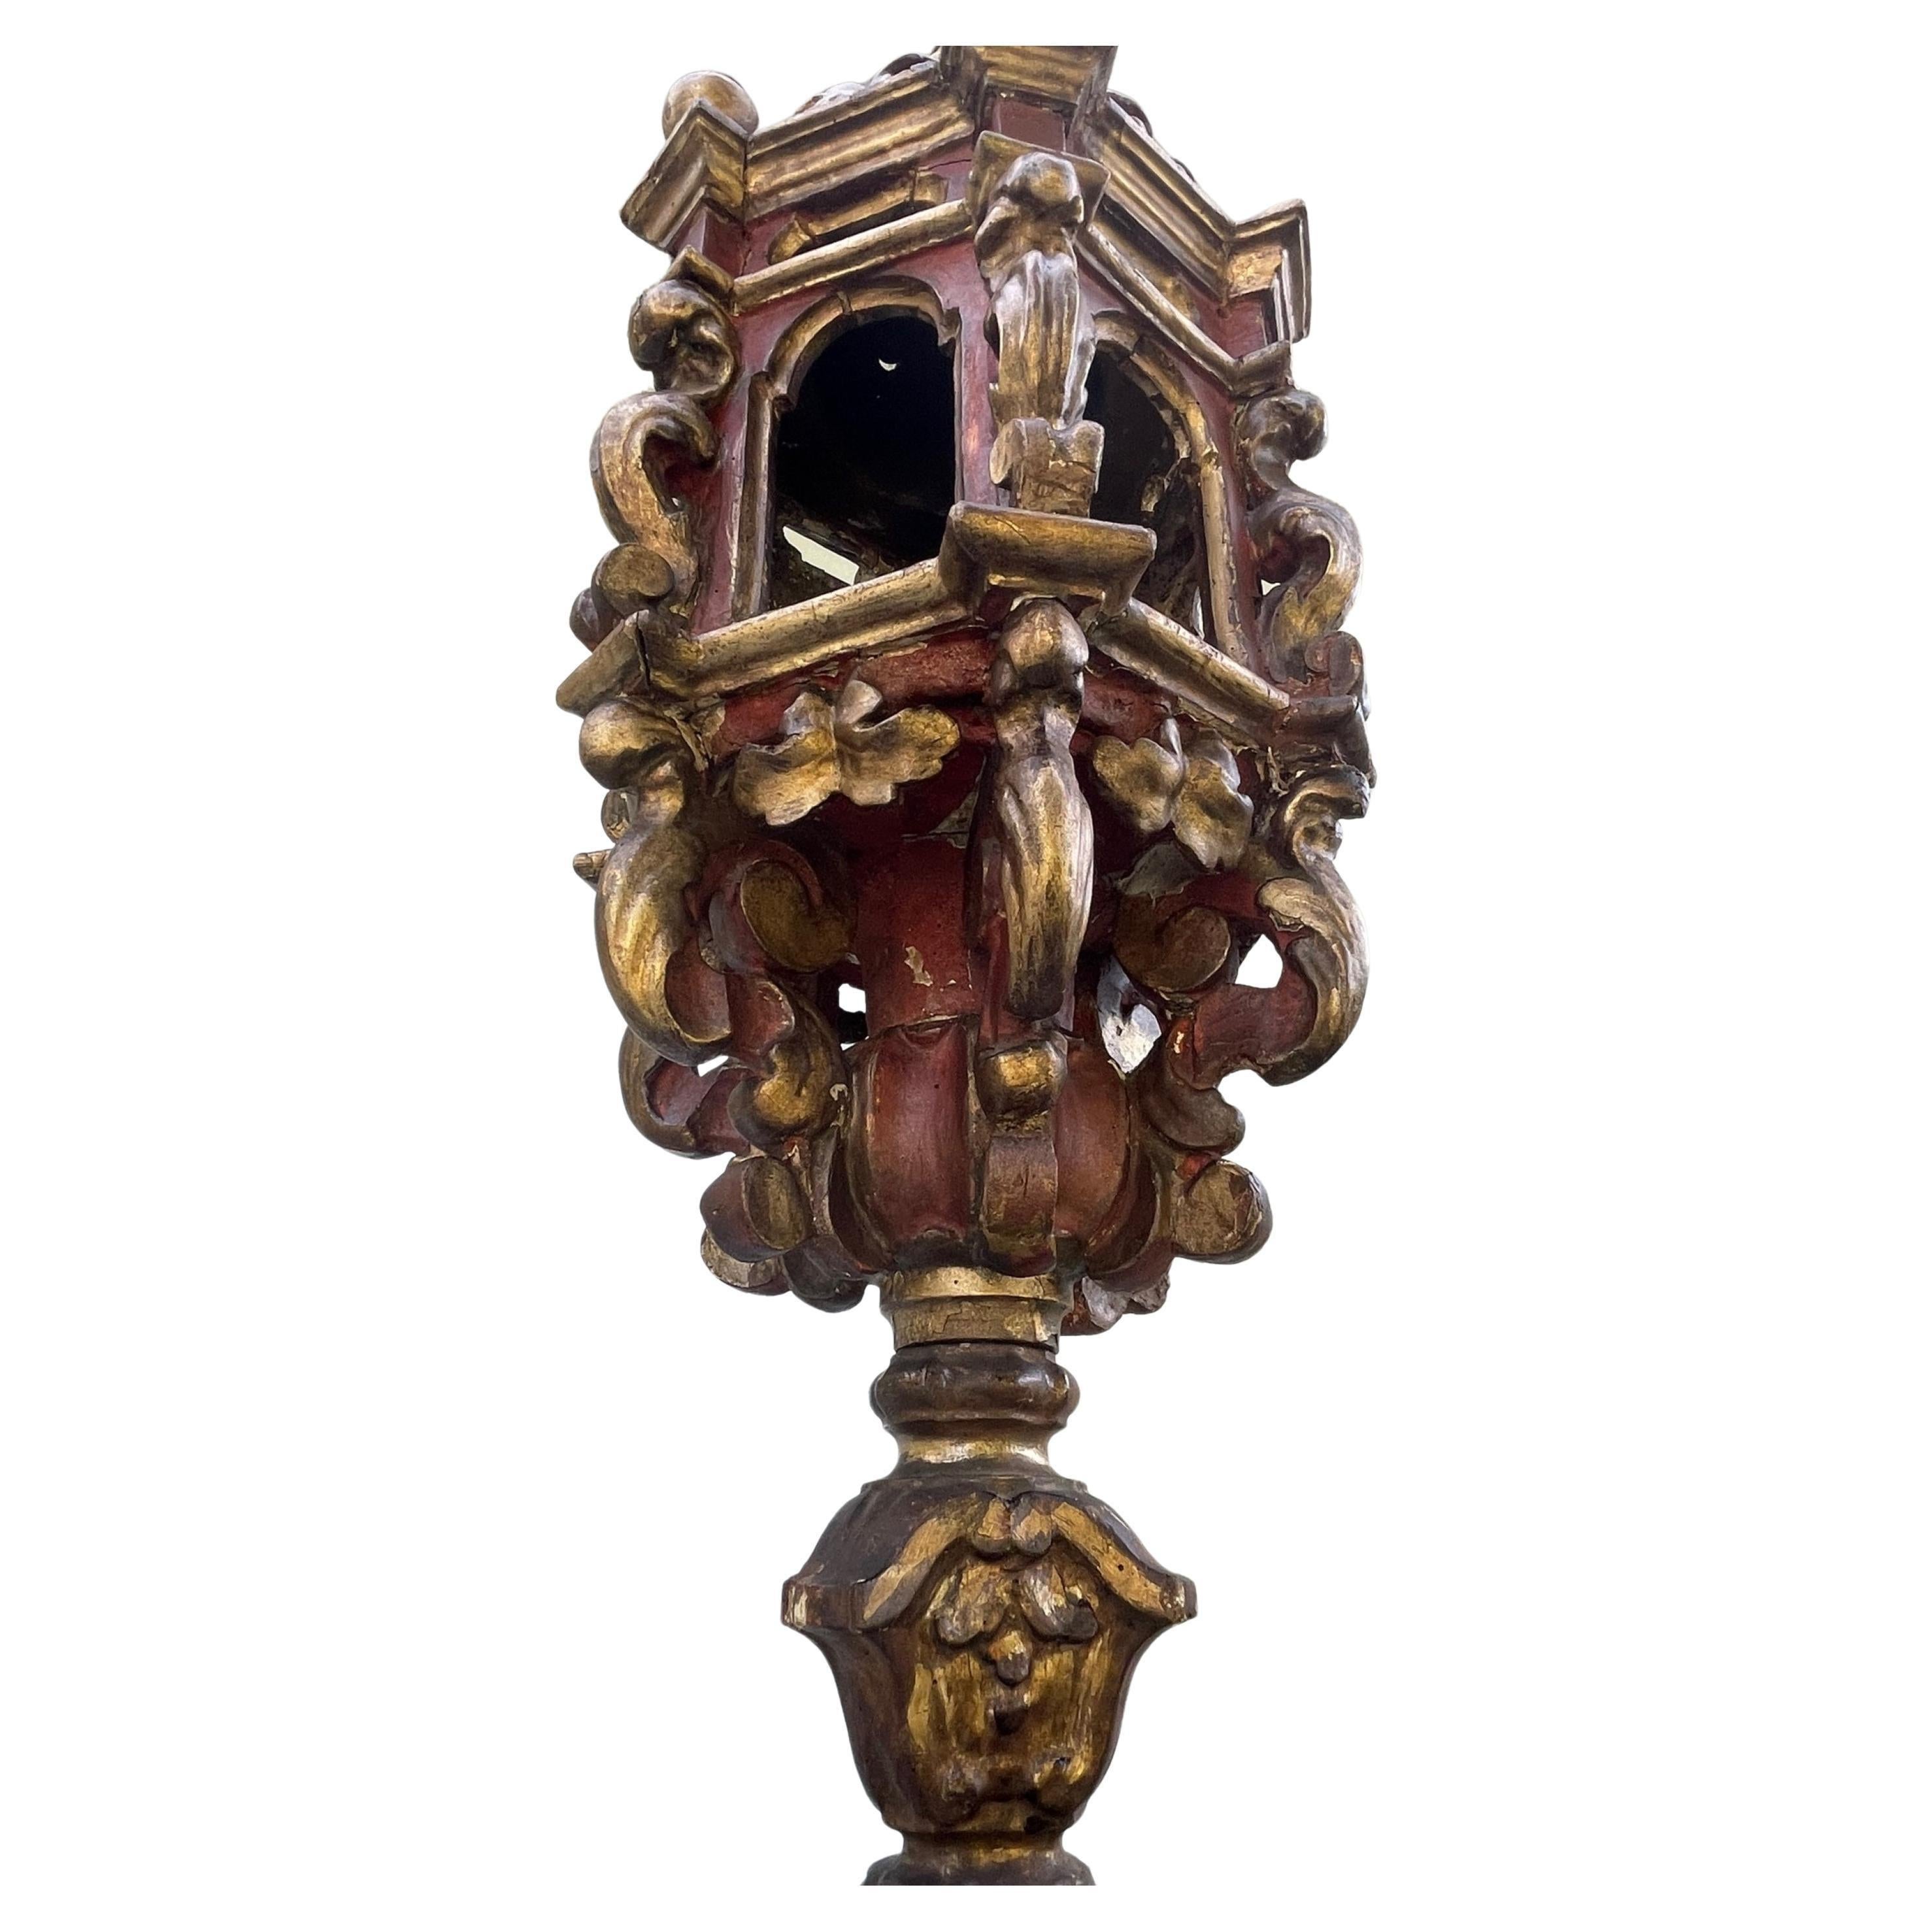 Italian 17th Century Large Six Sided Venetian Carved Gilded Baroque Hall Lantern For Sale